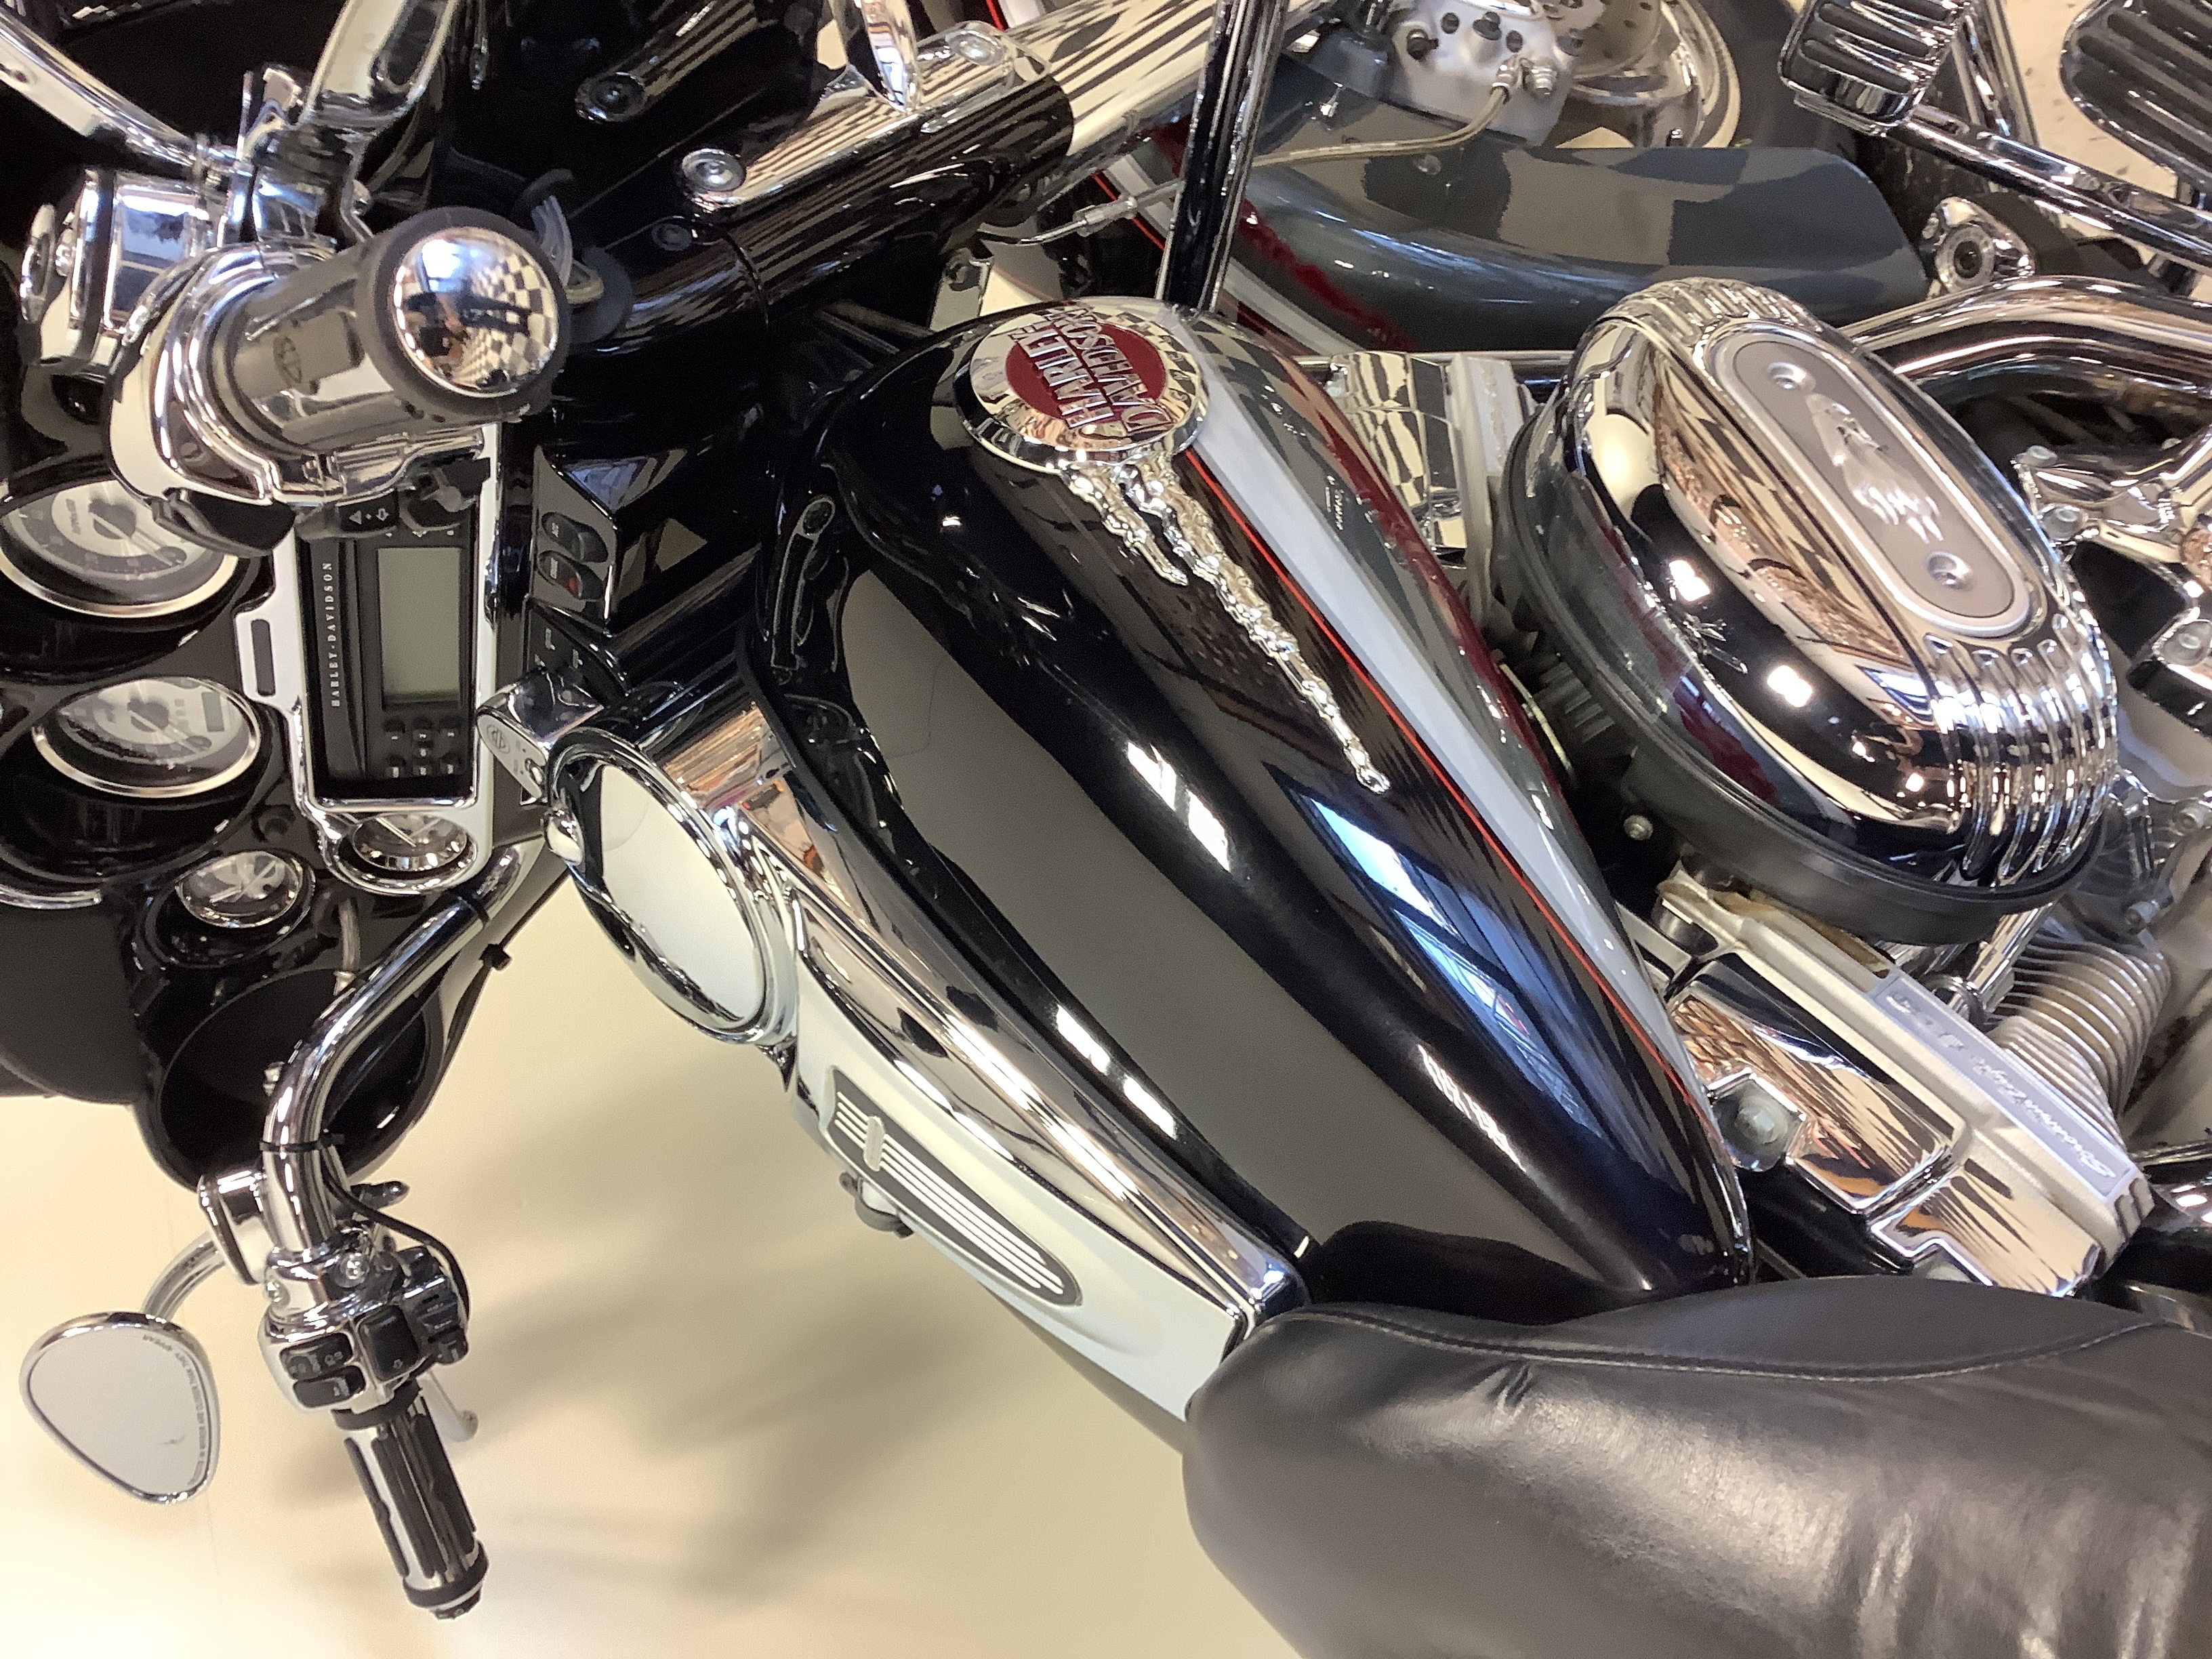 2006 Harley-Davidson Electra Glide Ultra Classic at Deluxe Harley Davidson